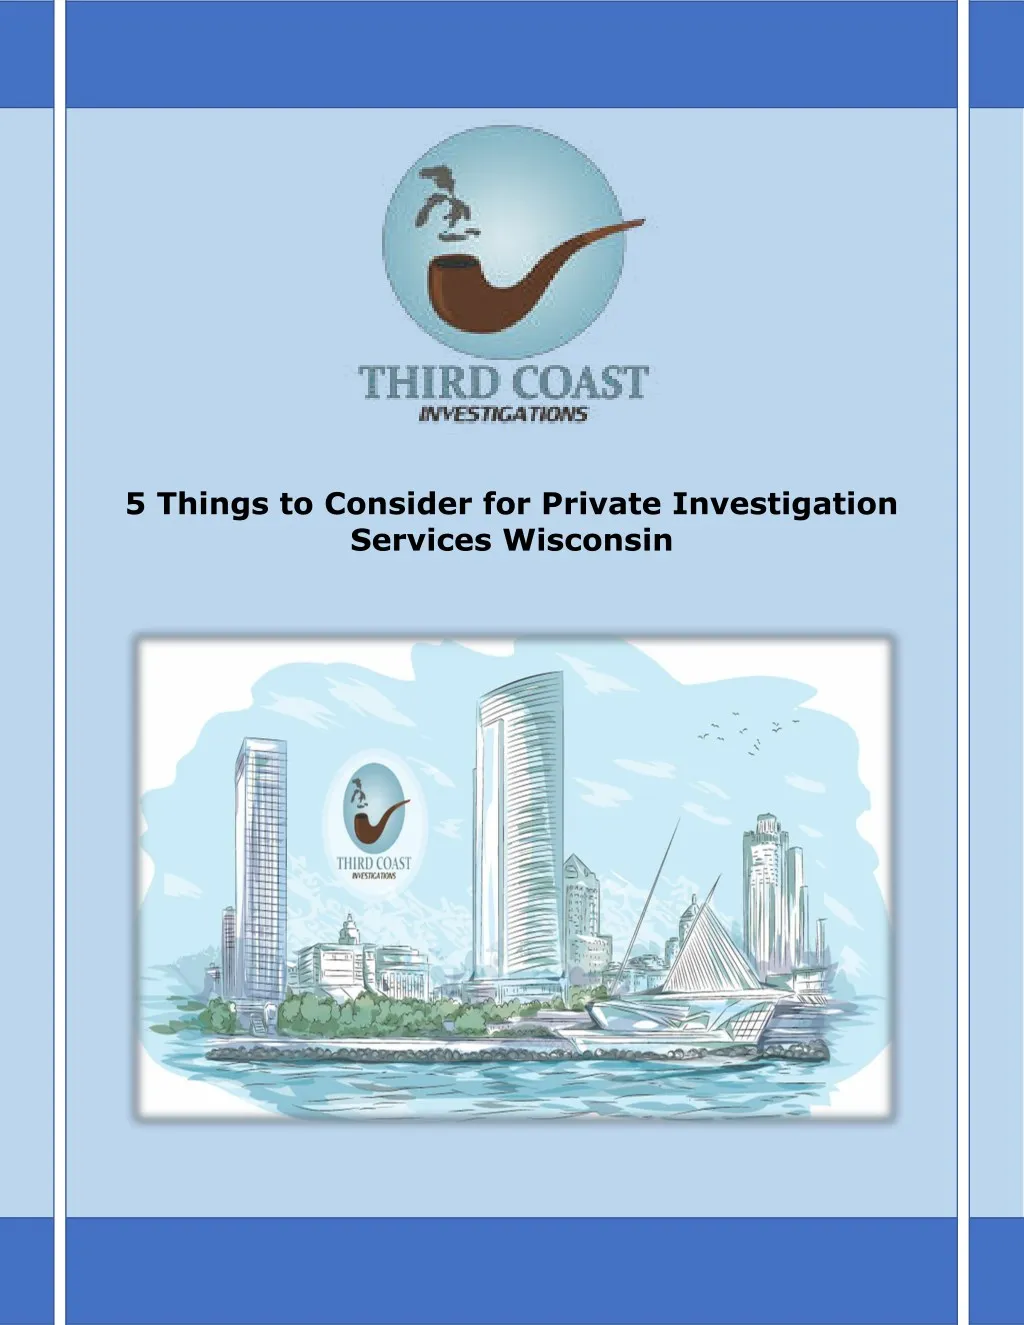 5 things to consider for private investigation